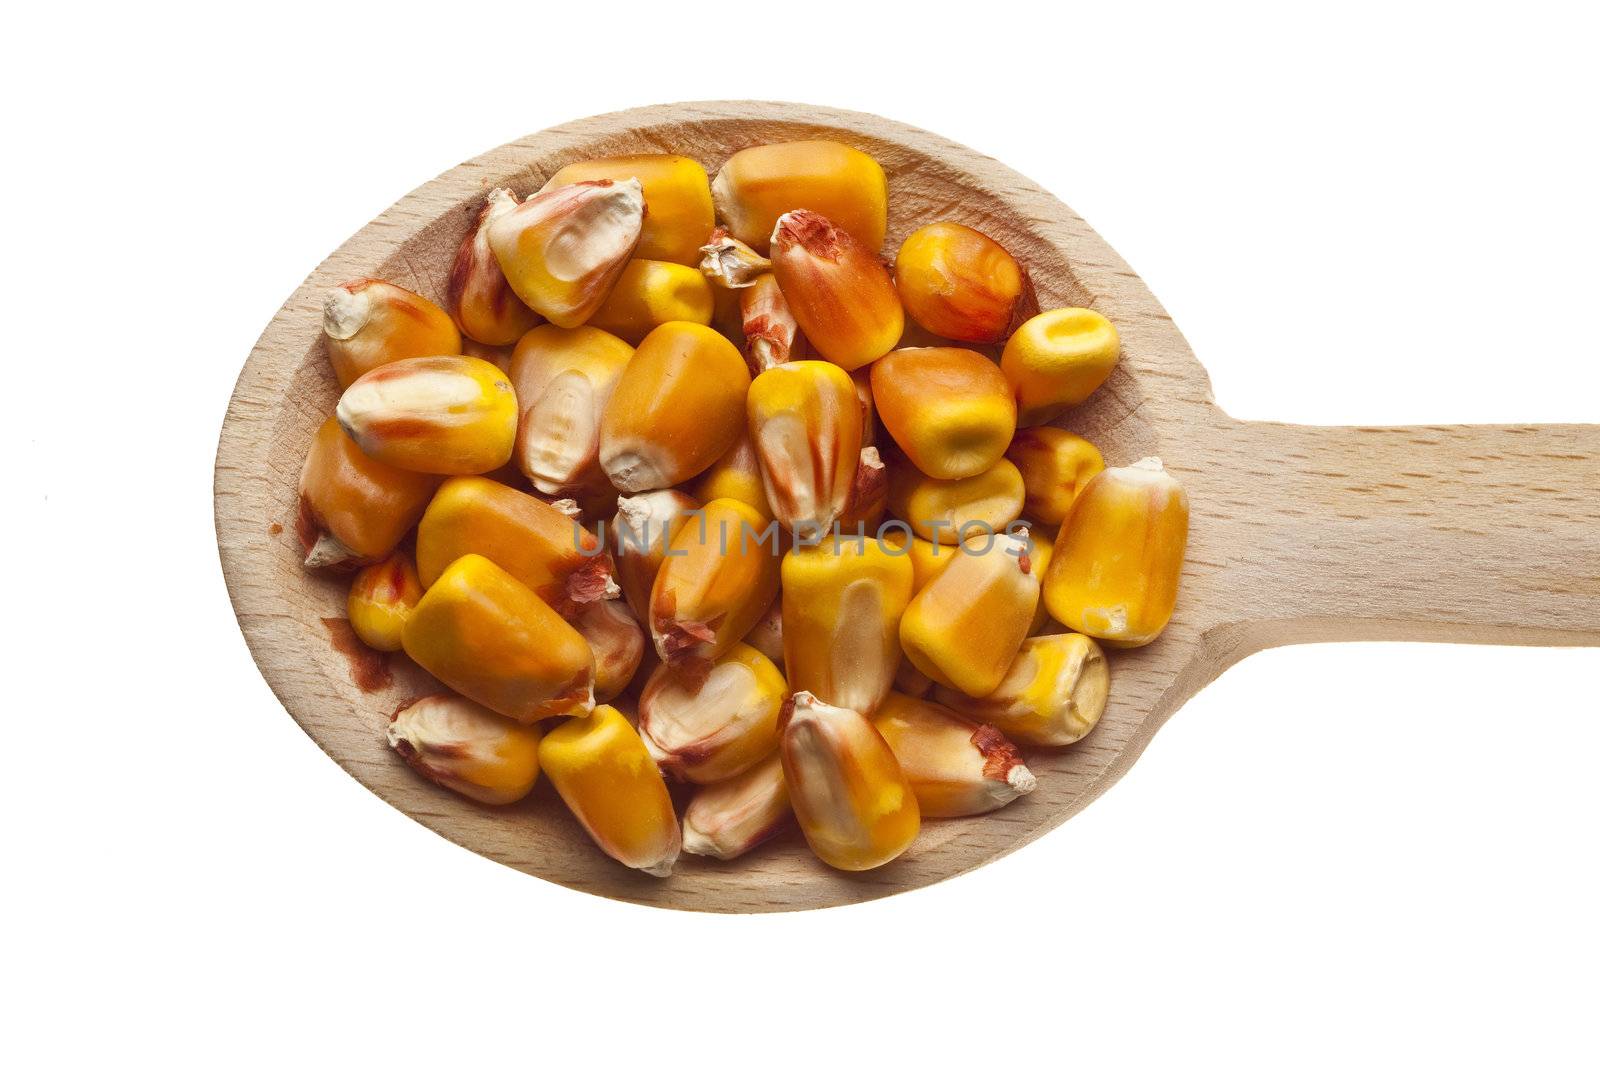 Herbs and spices on wooden spoons - corn